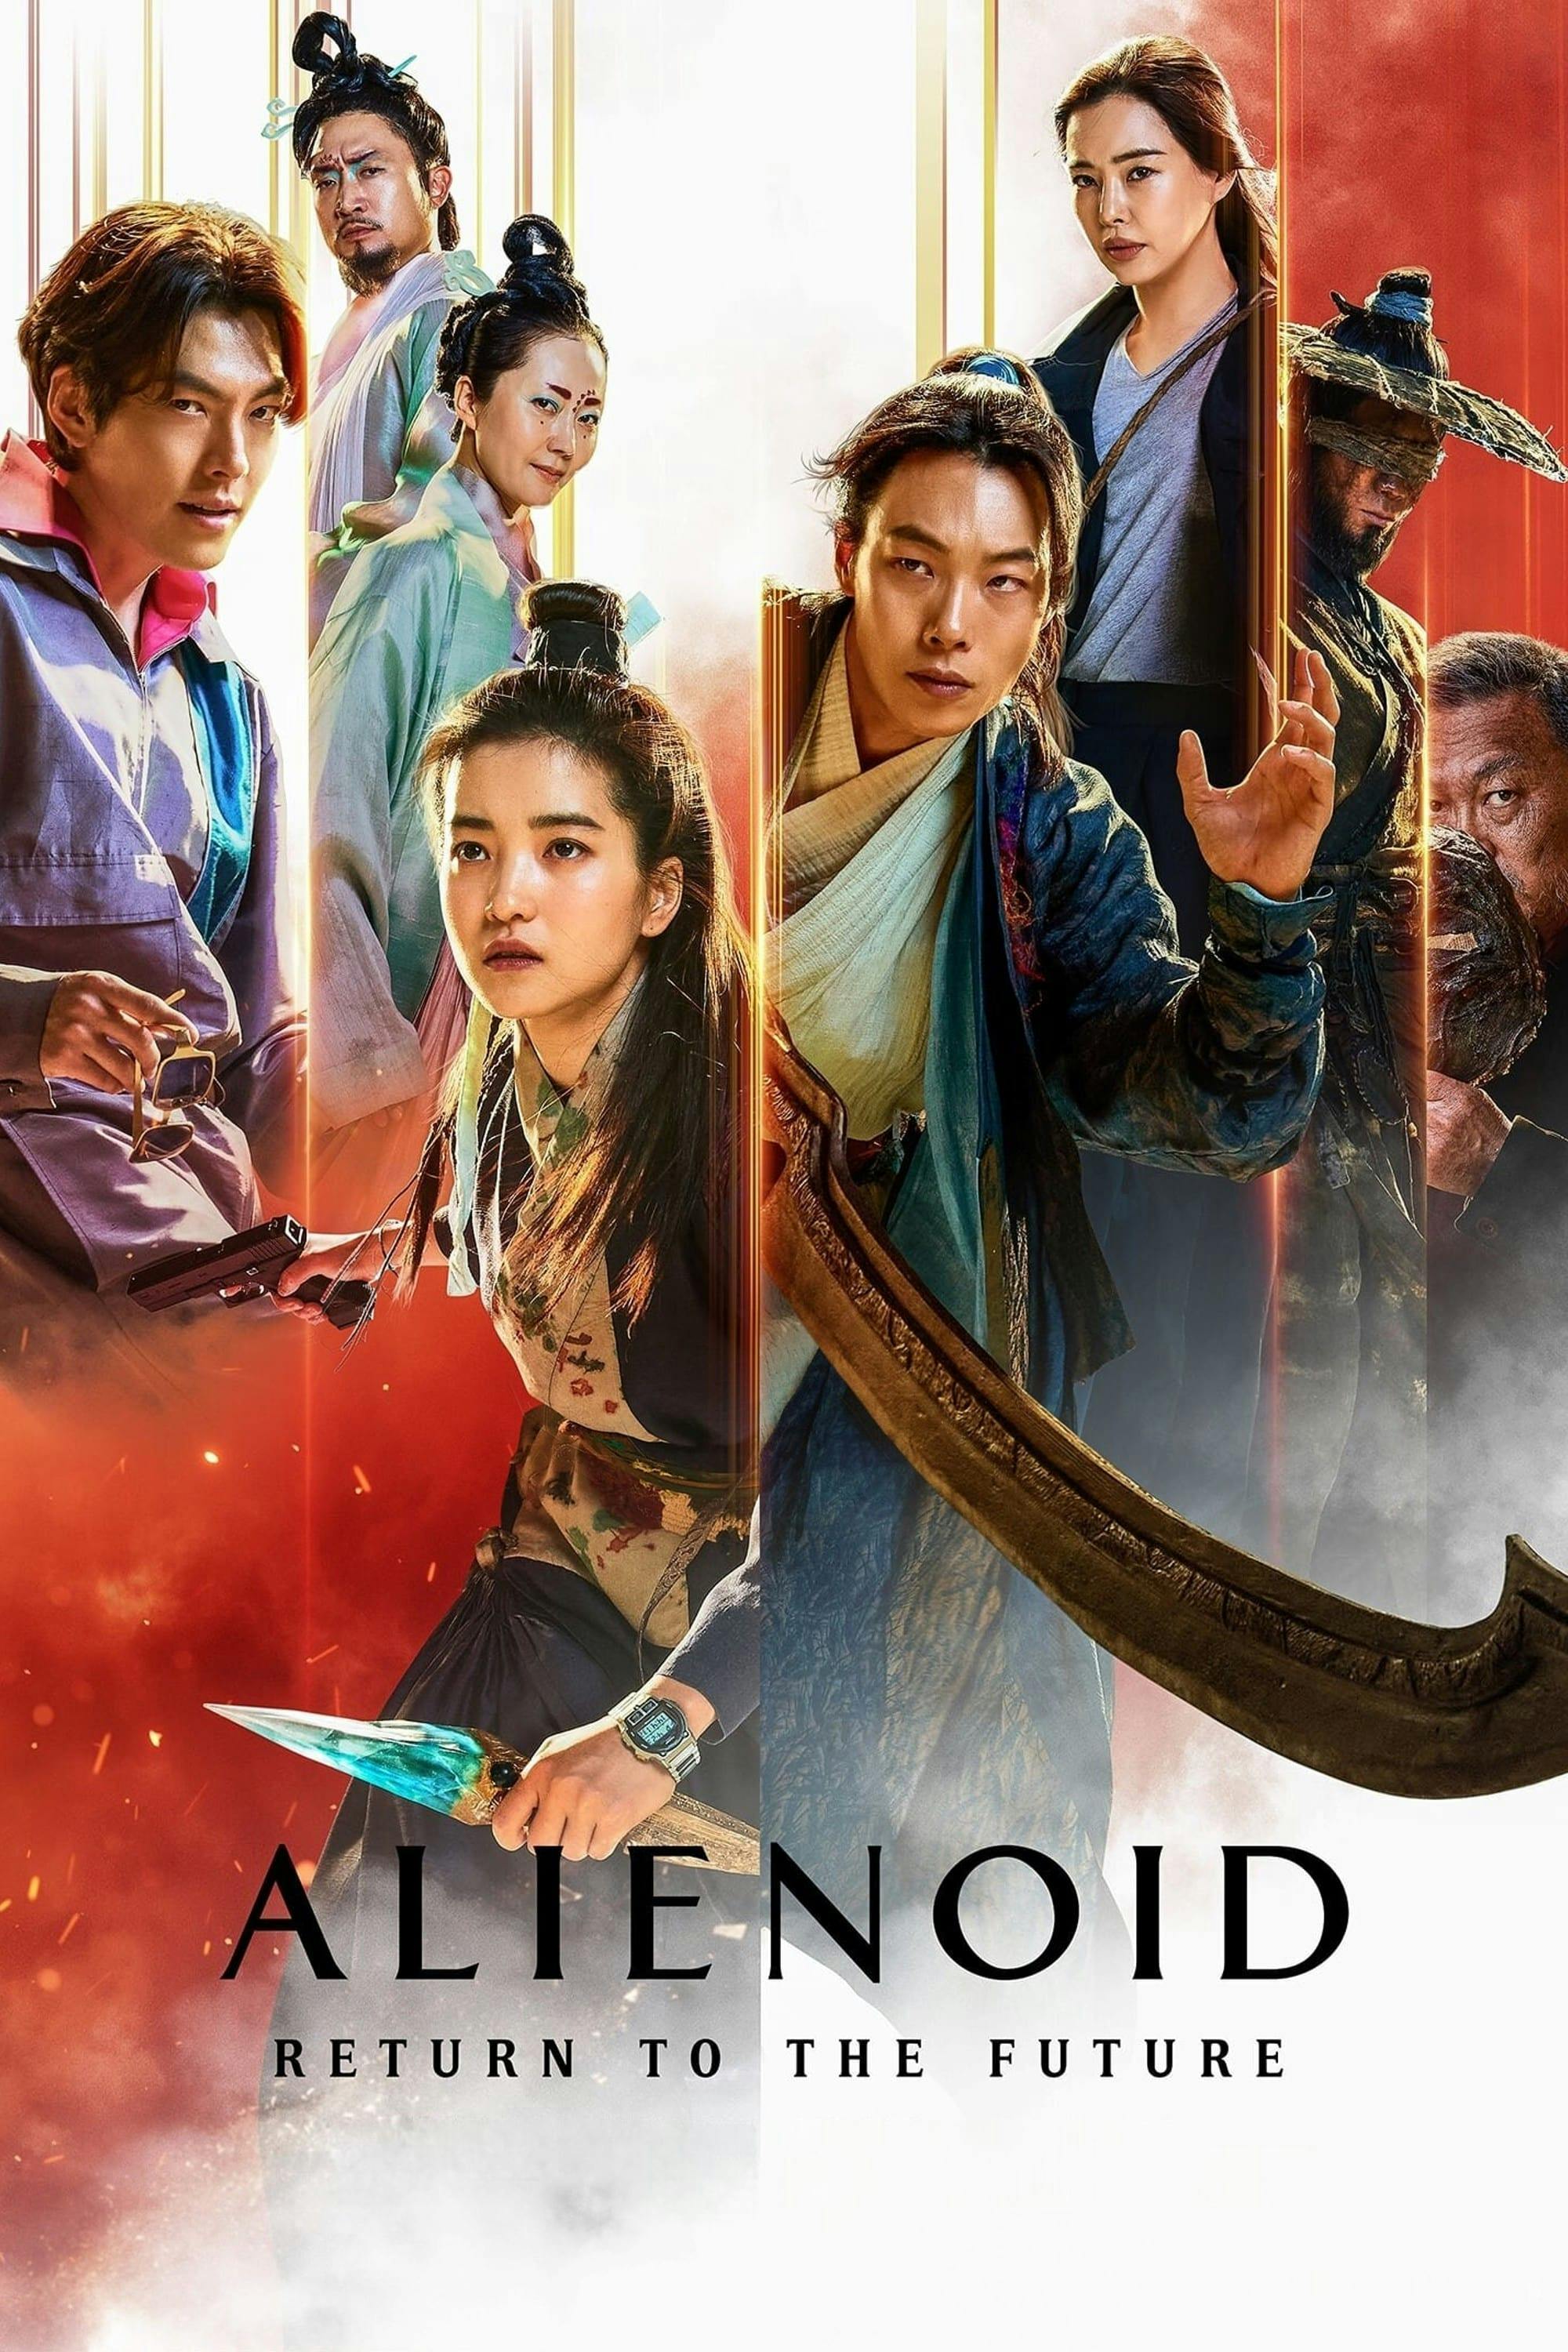 Movie poster of "Alienoid: Return to the Future"